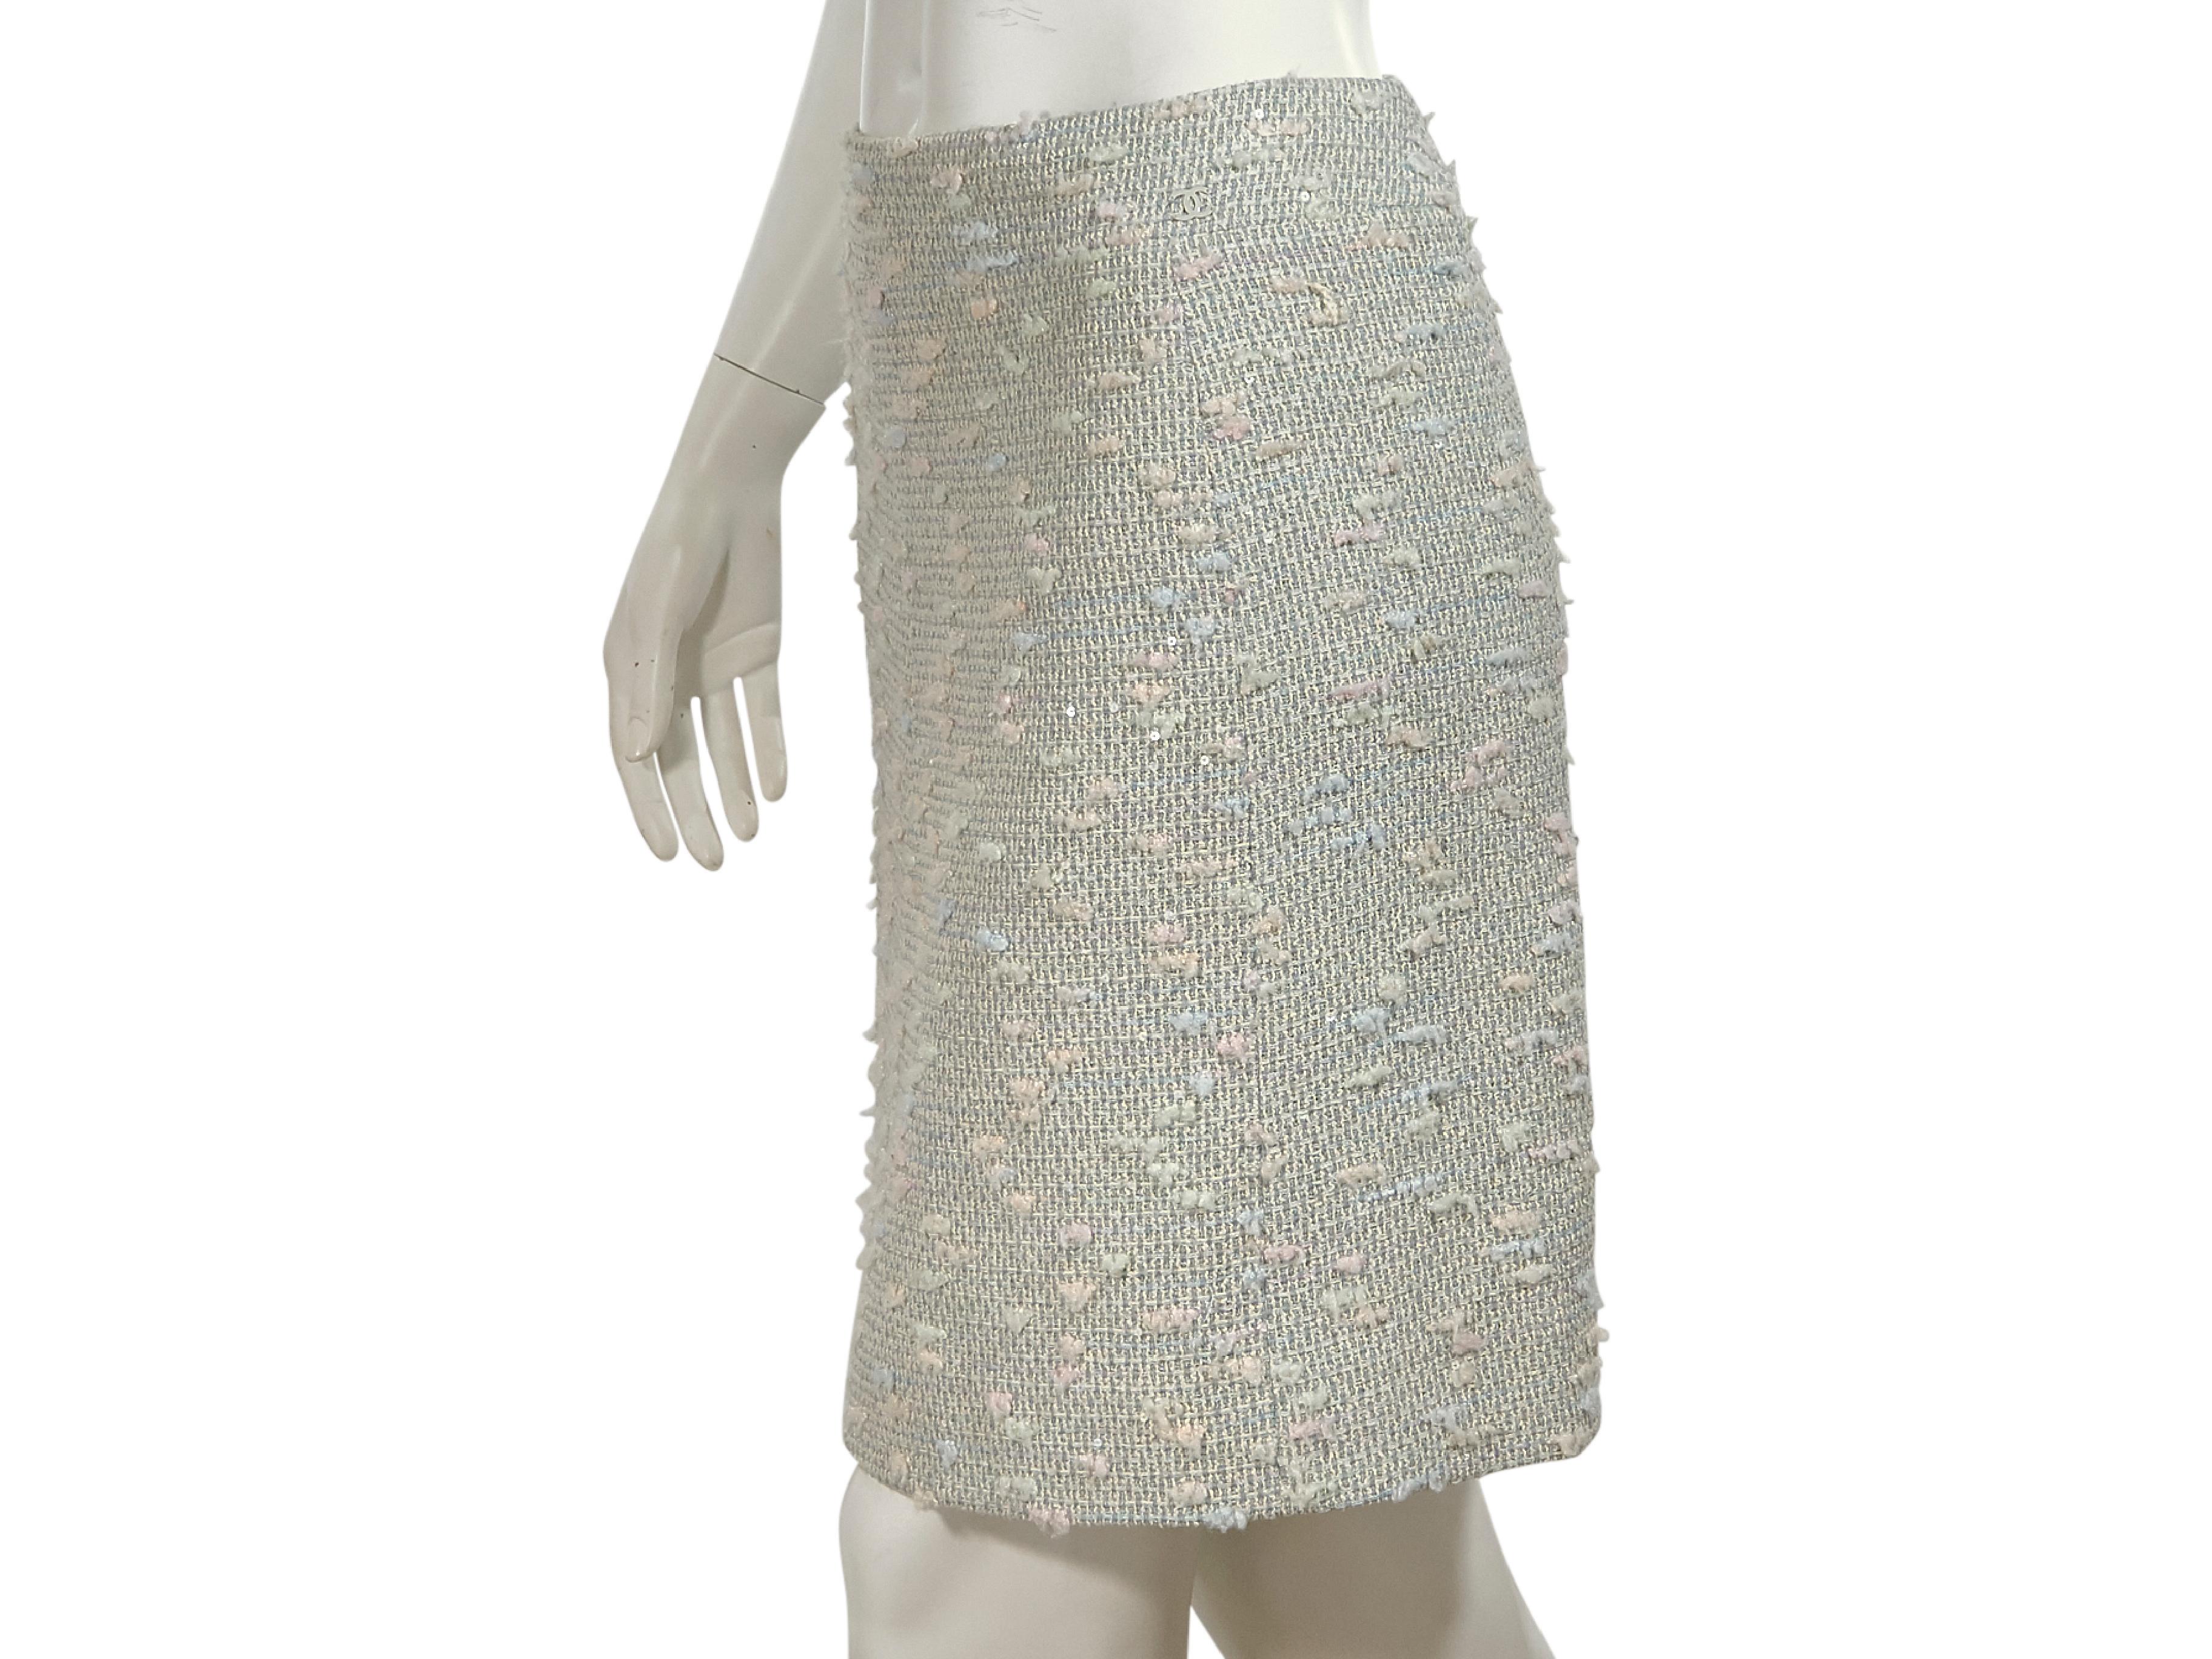 Product details:  Multicolor pastel tweed pencil skirt by Chanel.  Accented with sequins.  Concealed back zip closure.  Label size FR 38.  27